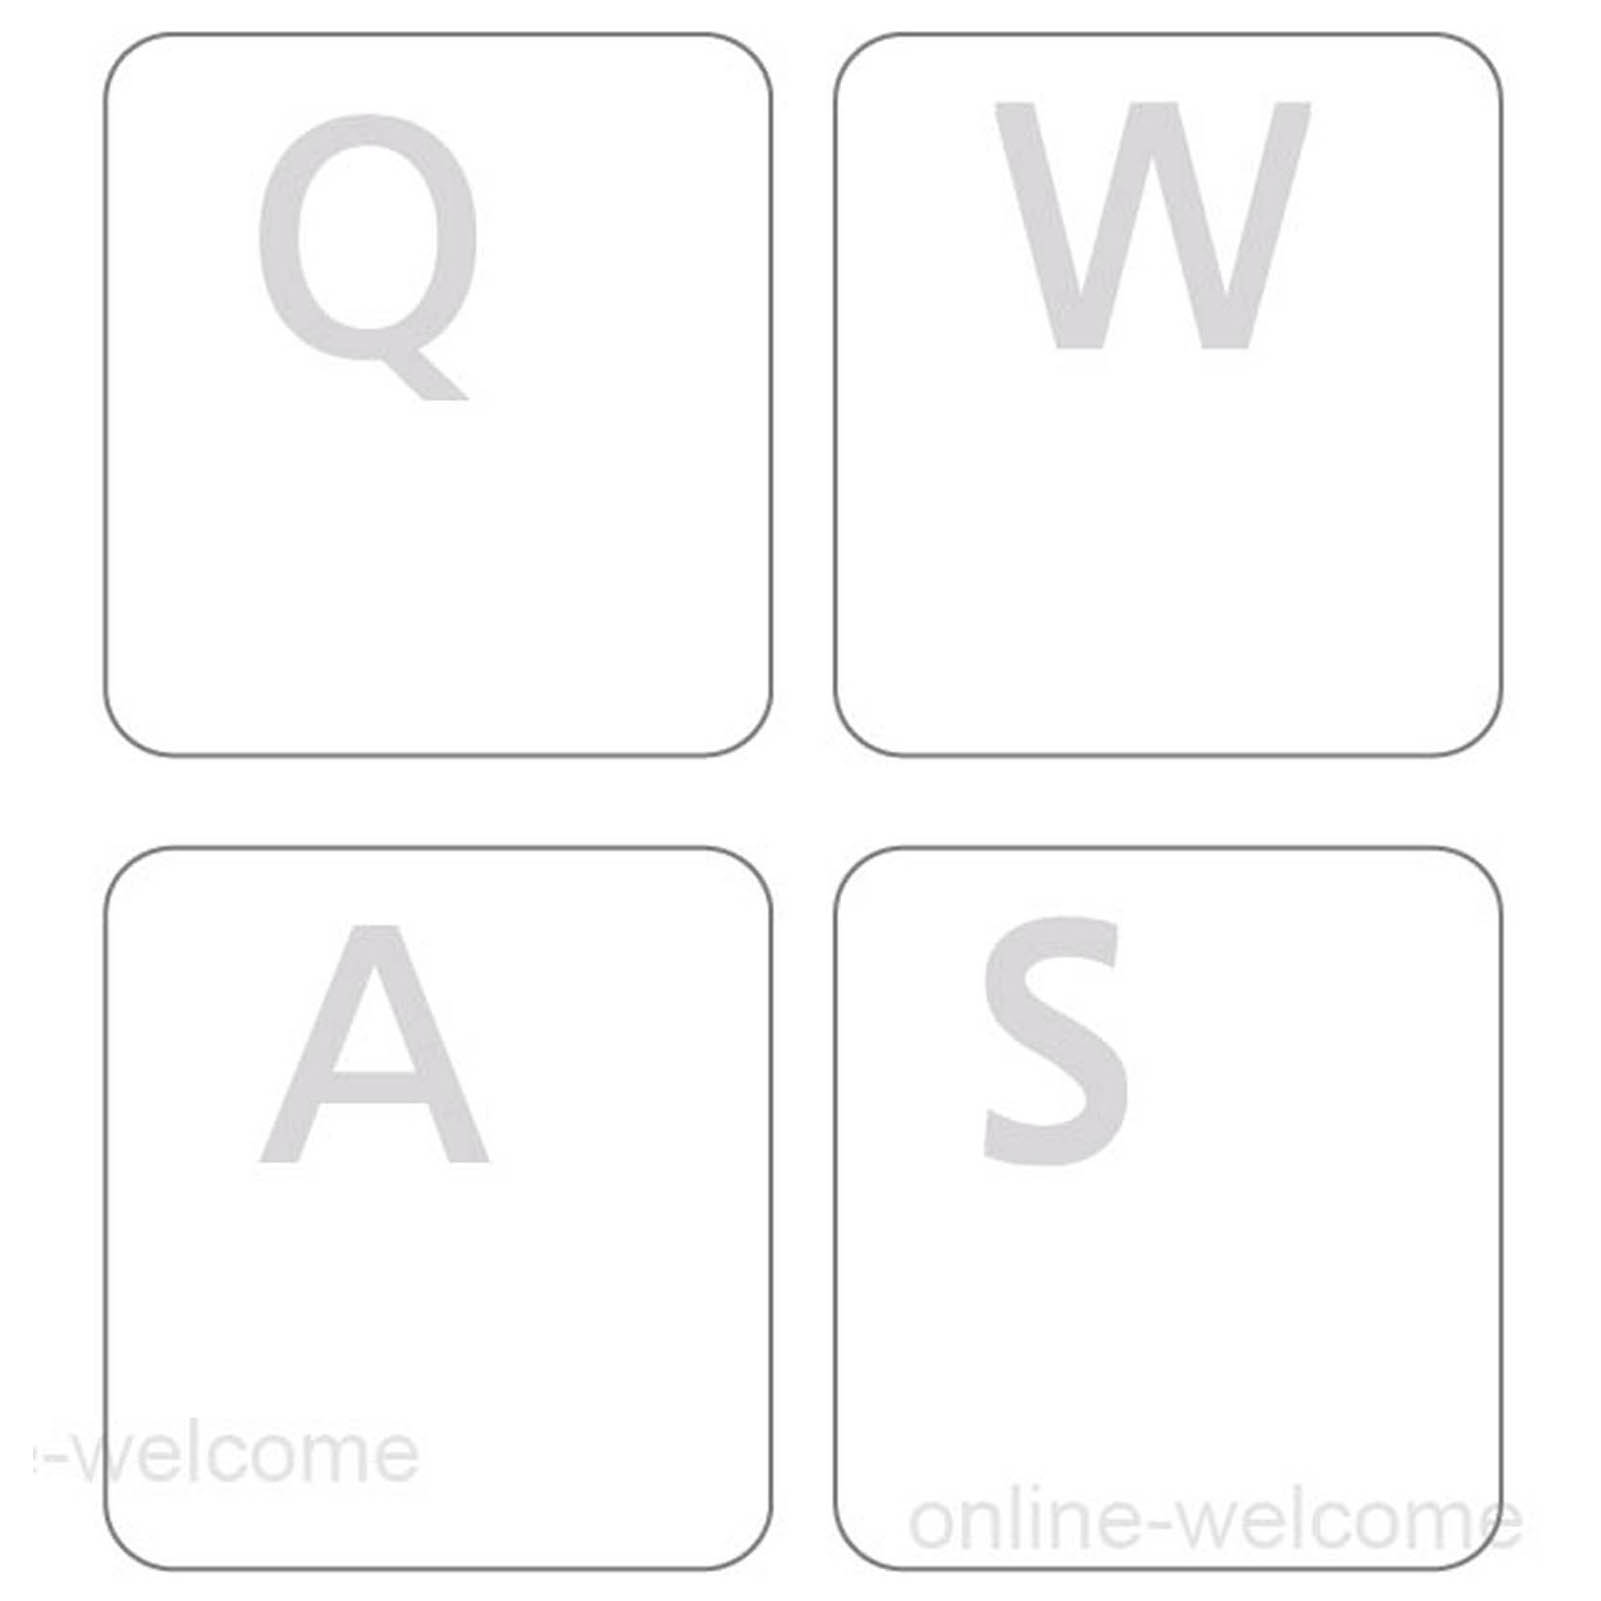 English US transparent keyboard stickers white letters